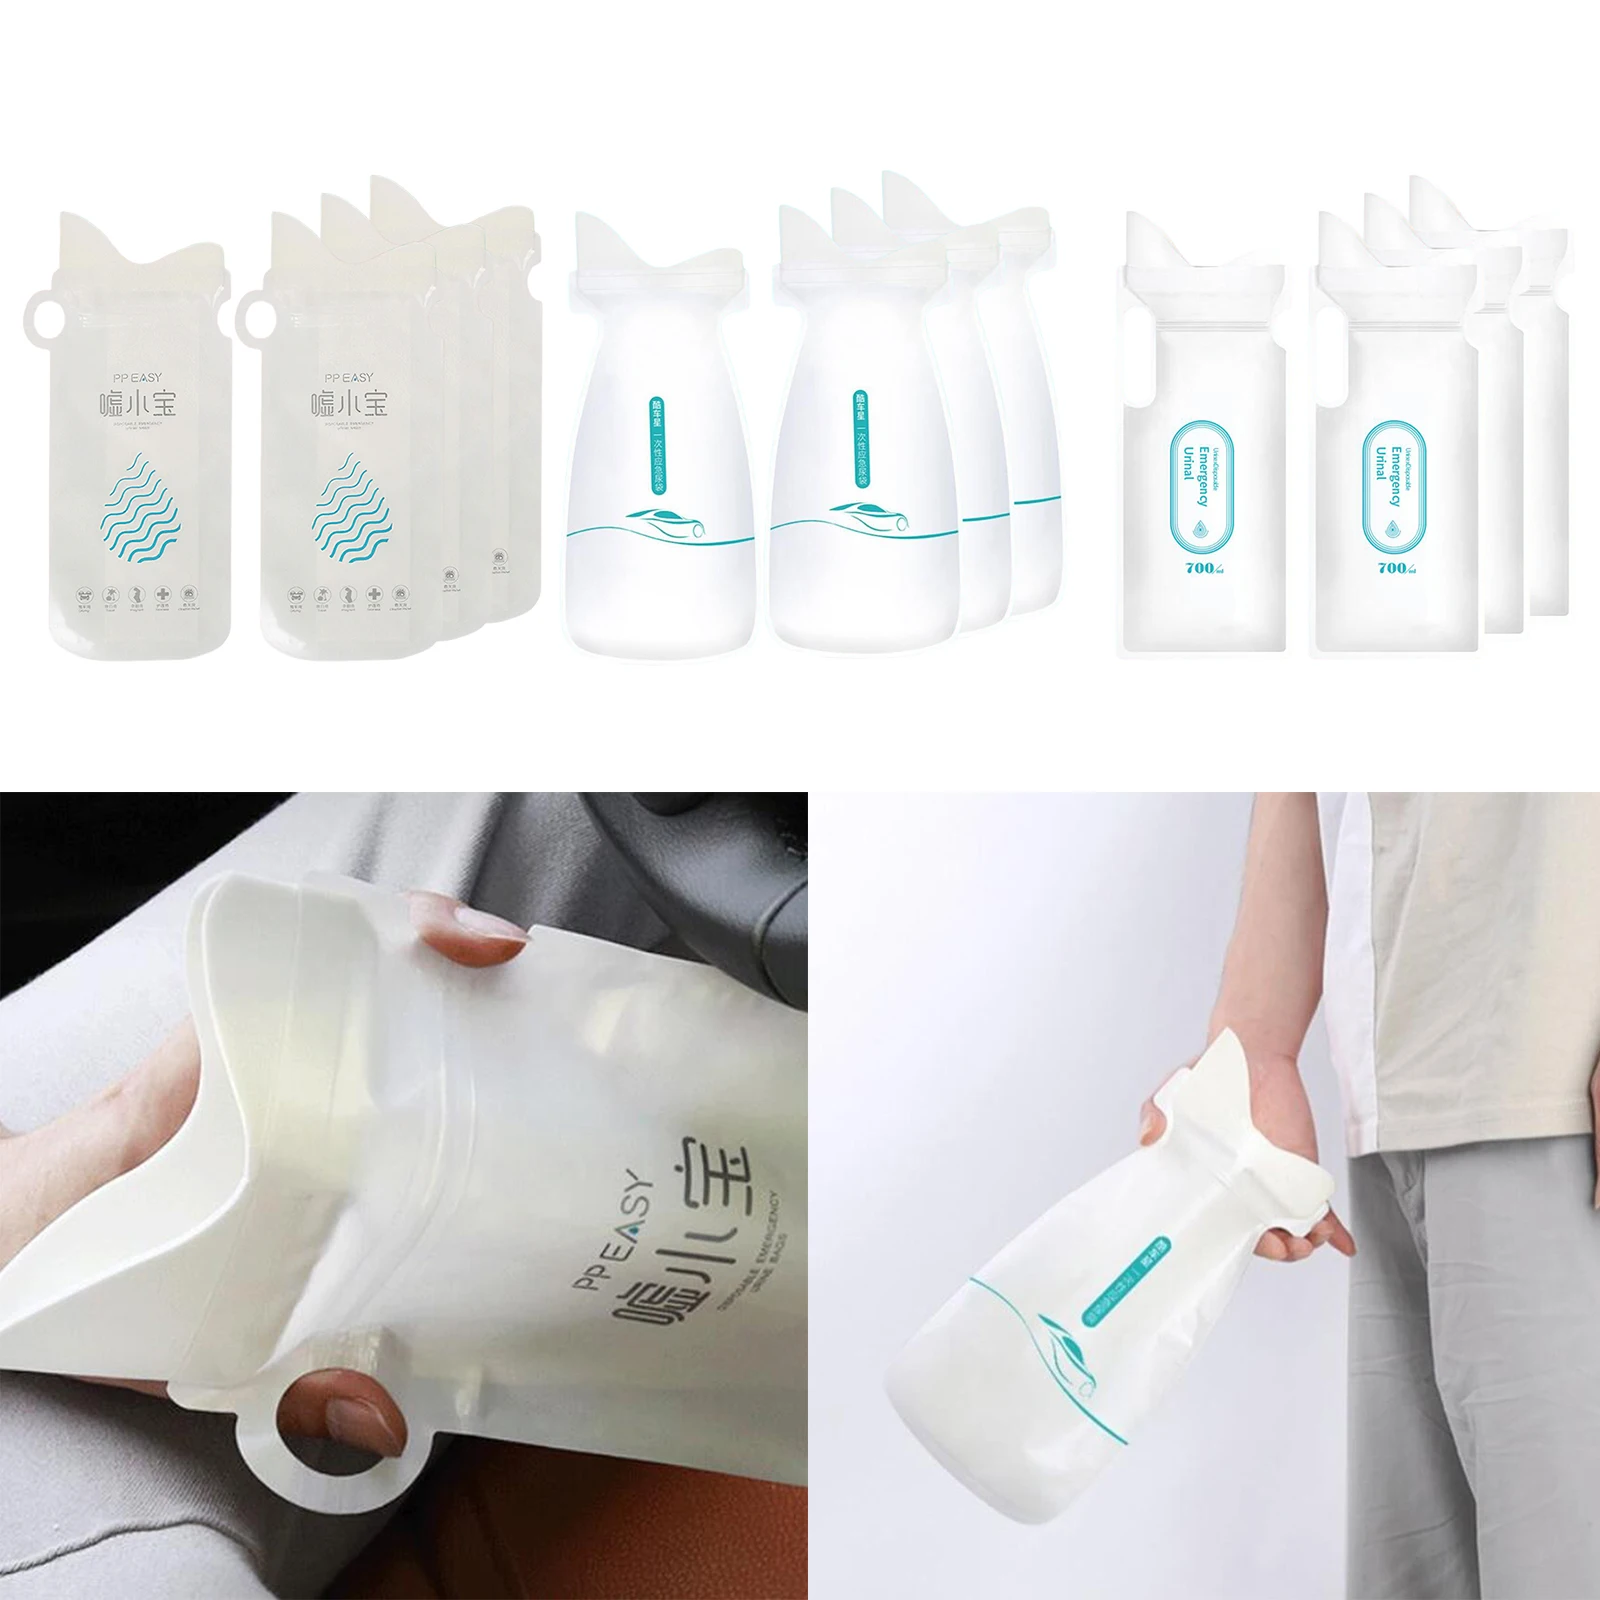 4x Unisex Disposable Urine Bags Women Men Camping Pee Bags Toilet Traffic Crowd for Adults Kids Outdoor Seasick Car Hiking